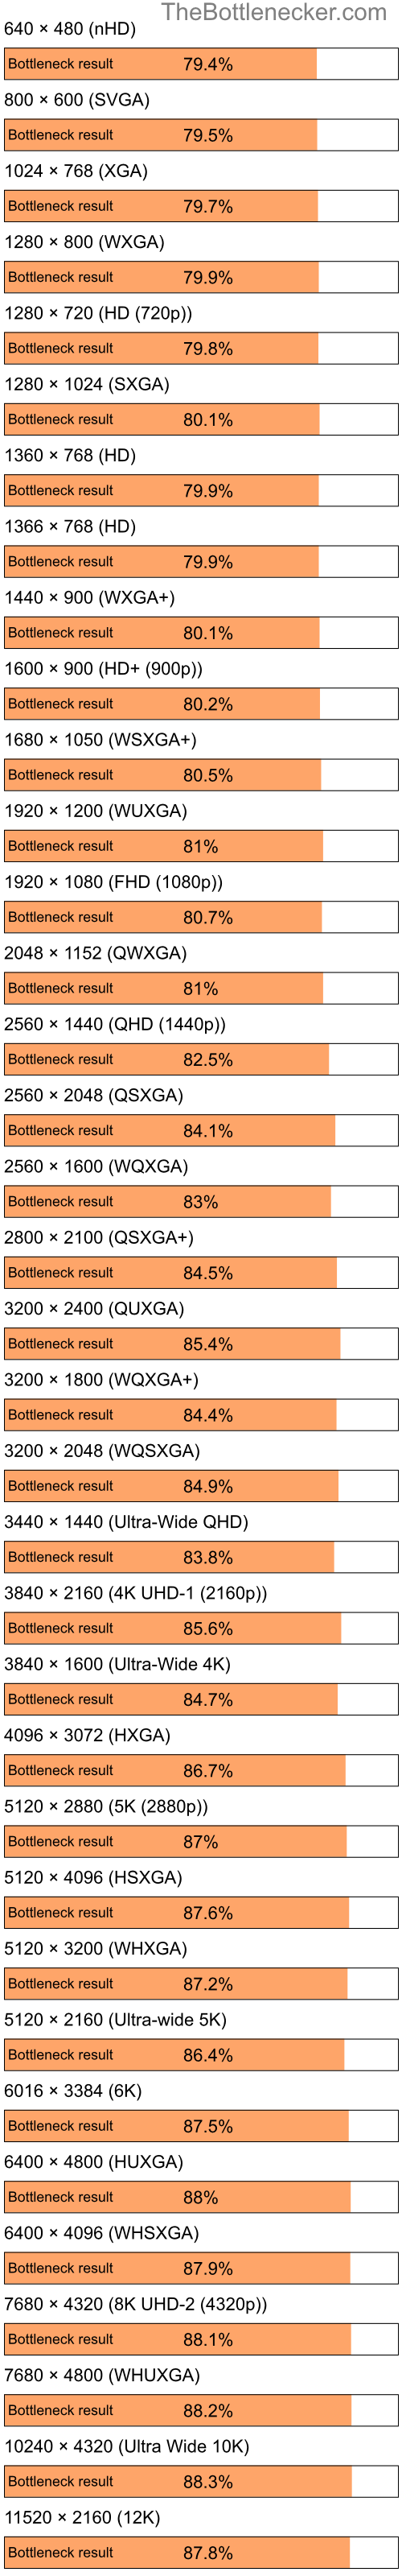 Bottleneck results by resolution for Intel Pentium 4 and AMD Mobility Radeon X1300 in Graphic Card Intense Tasks